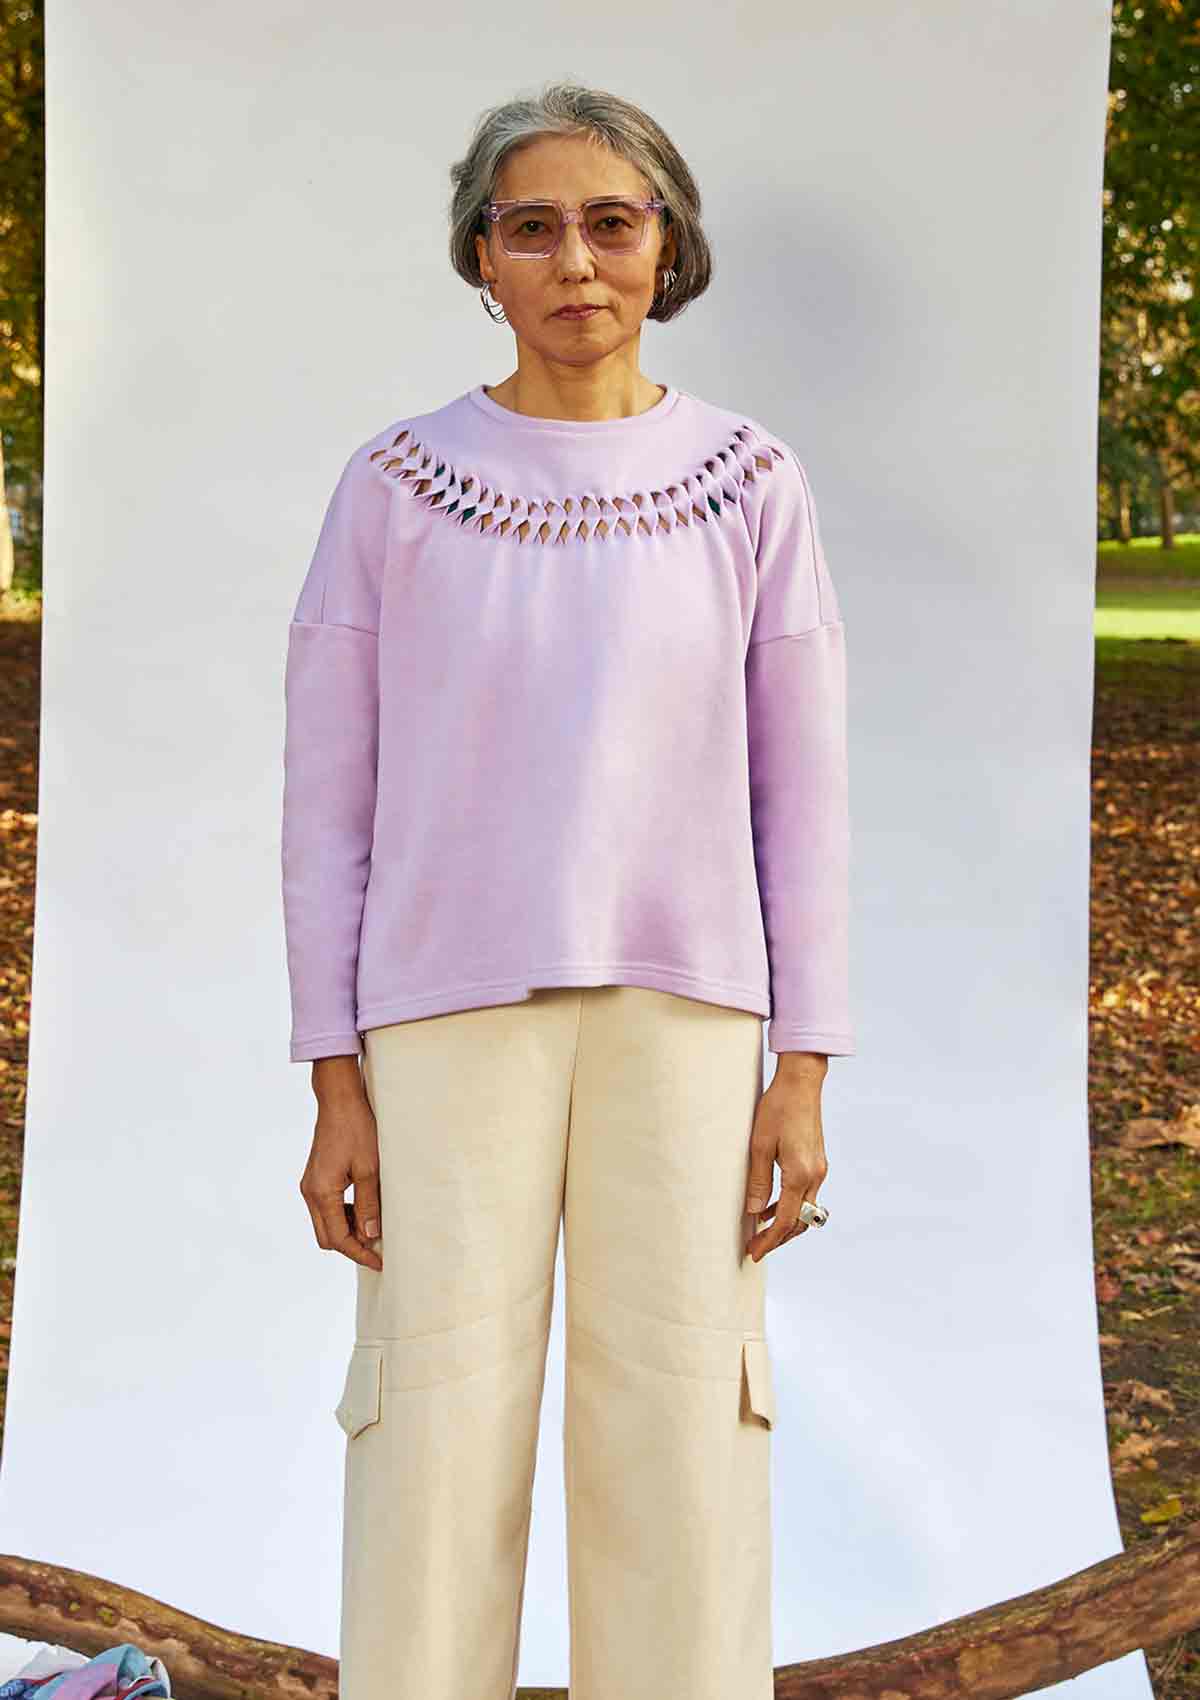 Women standing face on wearing the Anni Sweatshirt in Lilac with detailing where the fabric is cut, twisted and stitched back in place. She is standing in front of a white background in a park